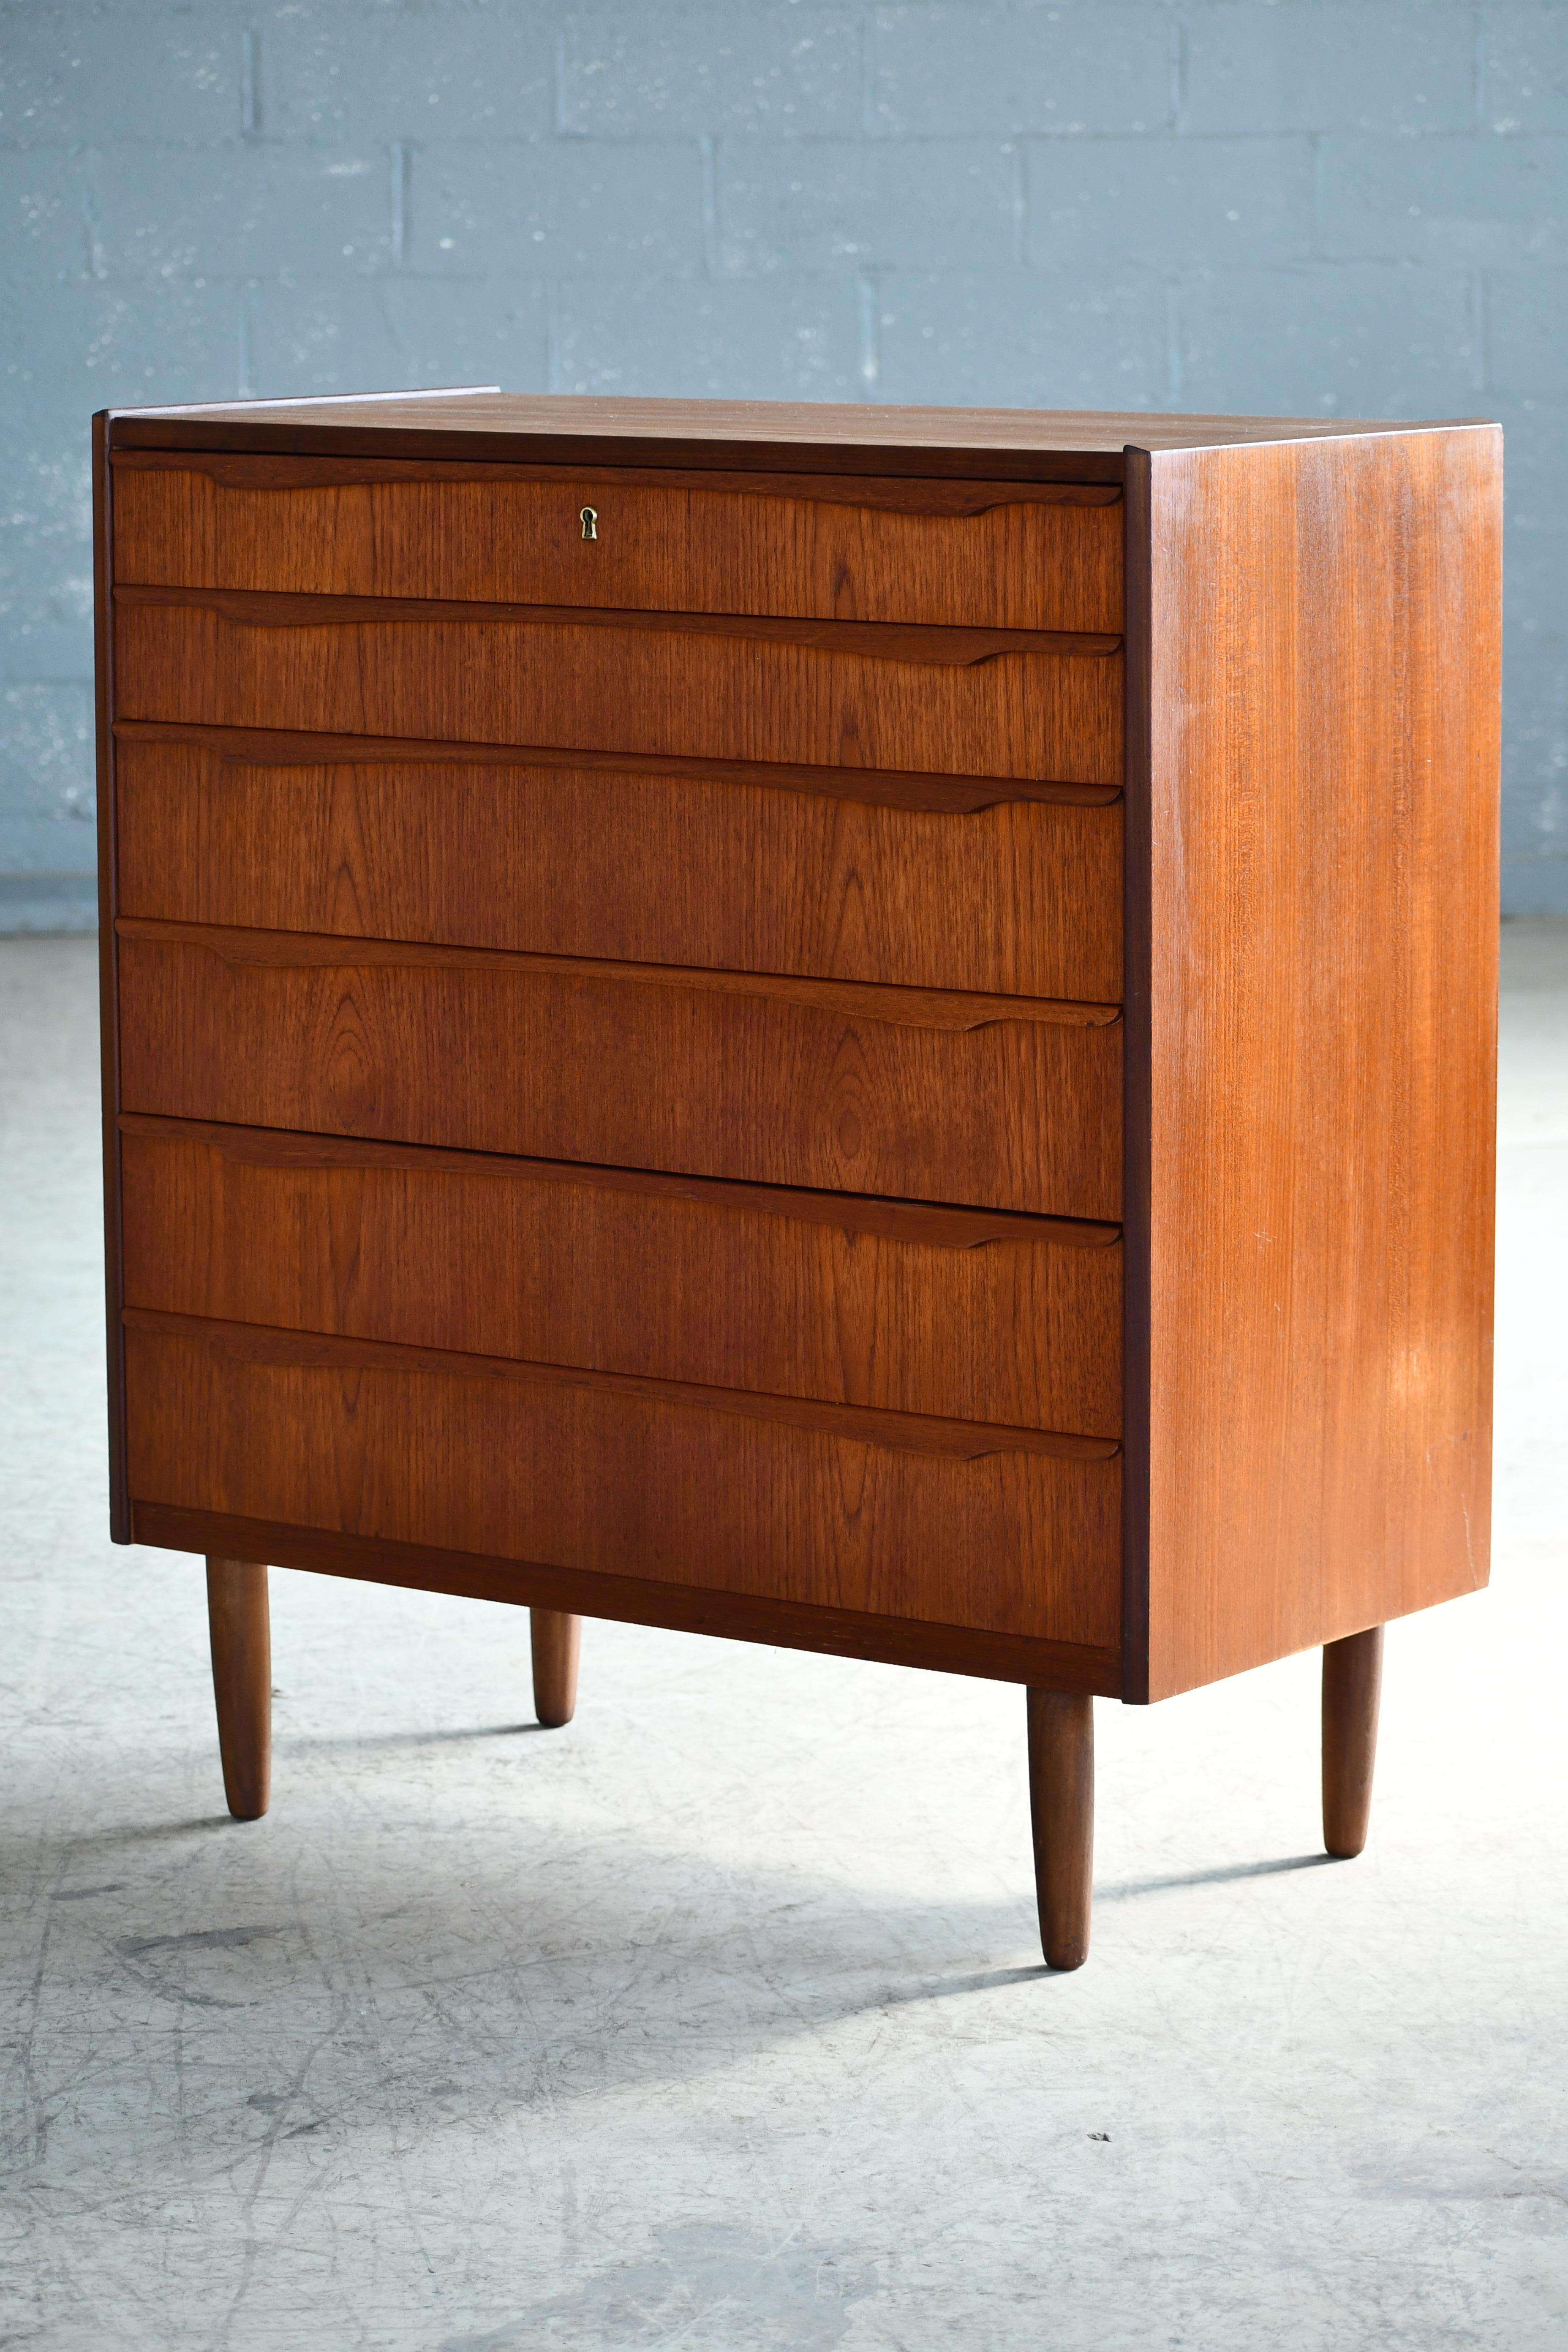 Beautiful Danish 1960s teak tall dresser or chest or drawers in the style of Kai Kristiansen. Sharp distinct design lines. Teak veneer with edges of solid teak and pulls carved from solid teak raised on solid tapered teak legs. Very nice color and